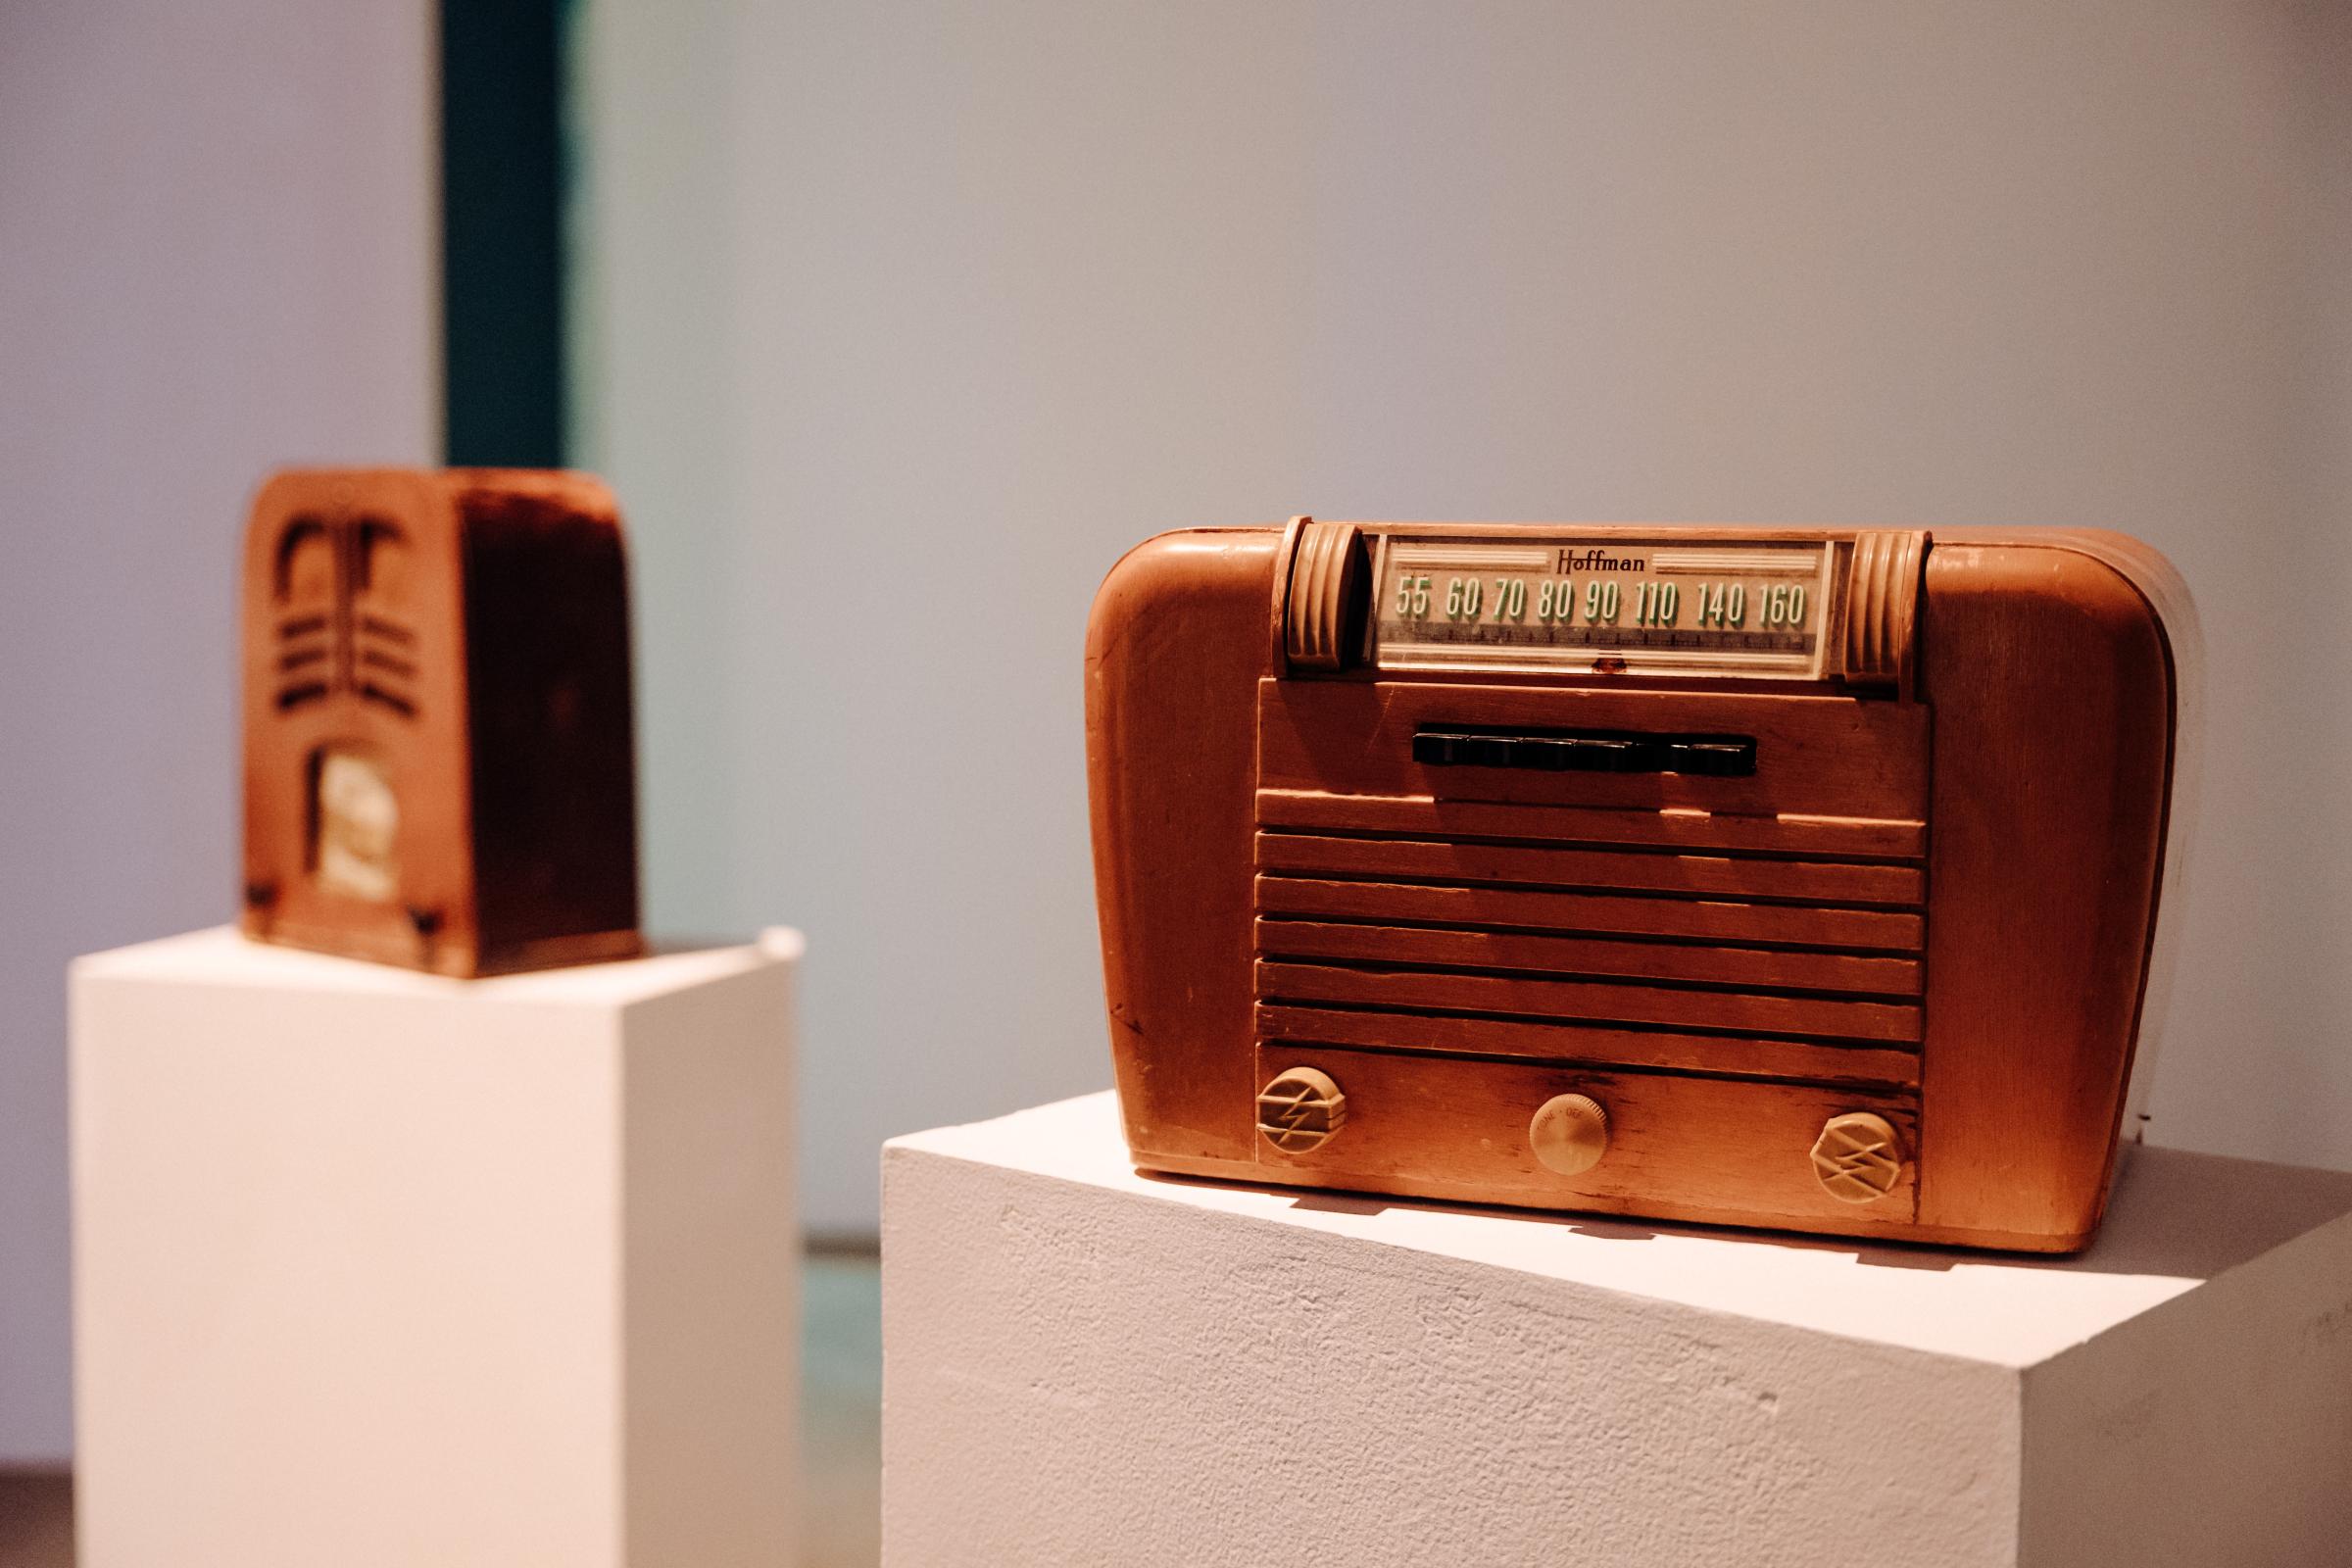 Two wooden vintage radios on white pedestals. The one in the background stands vertical, the one in the foreground is wide with three knobs. 

